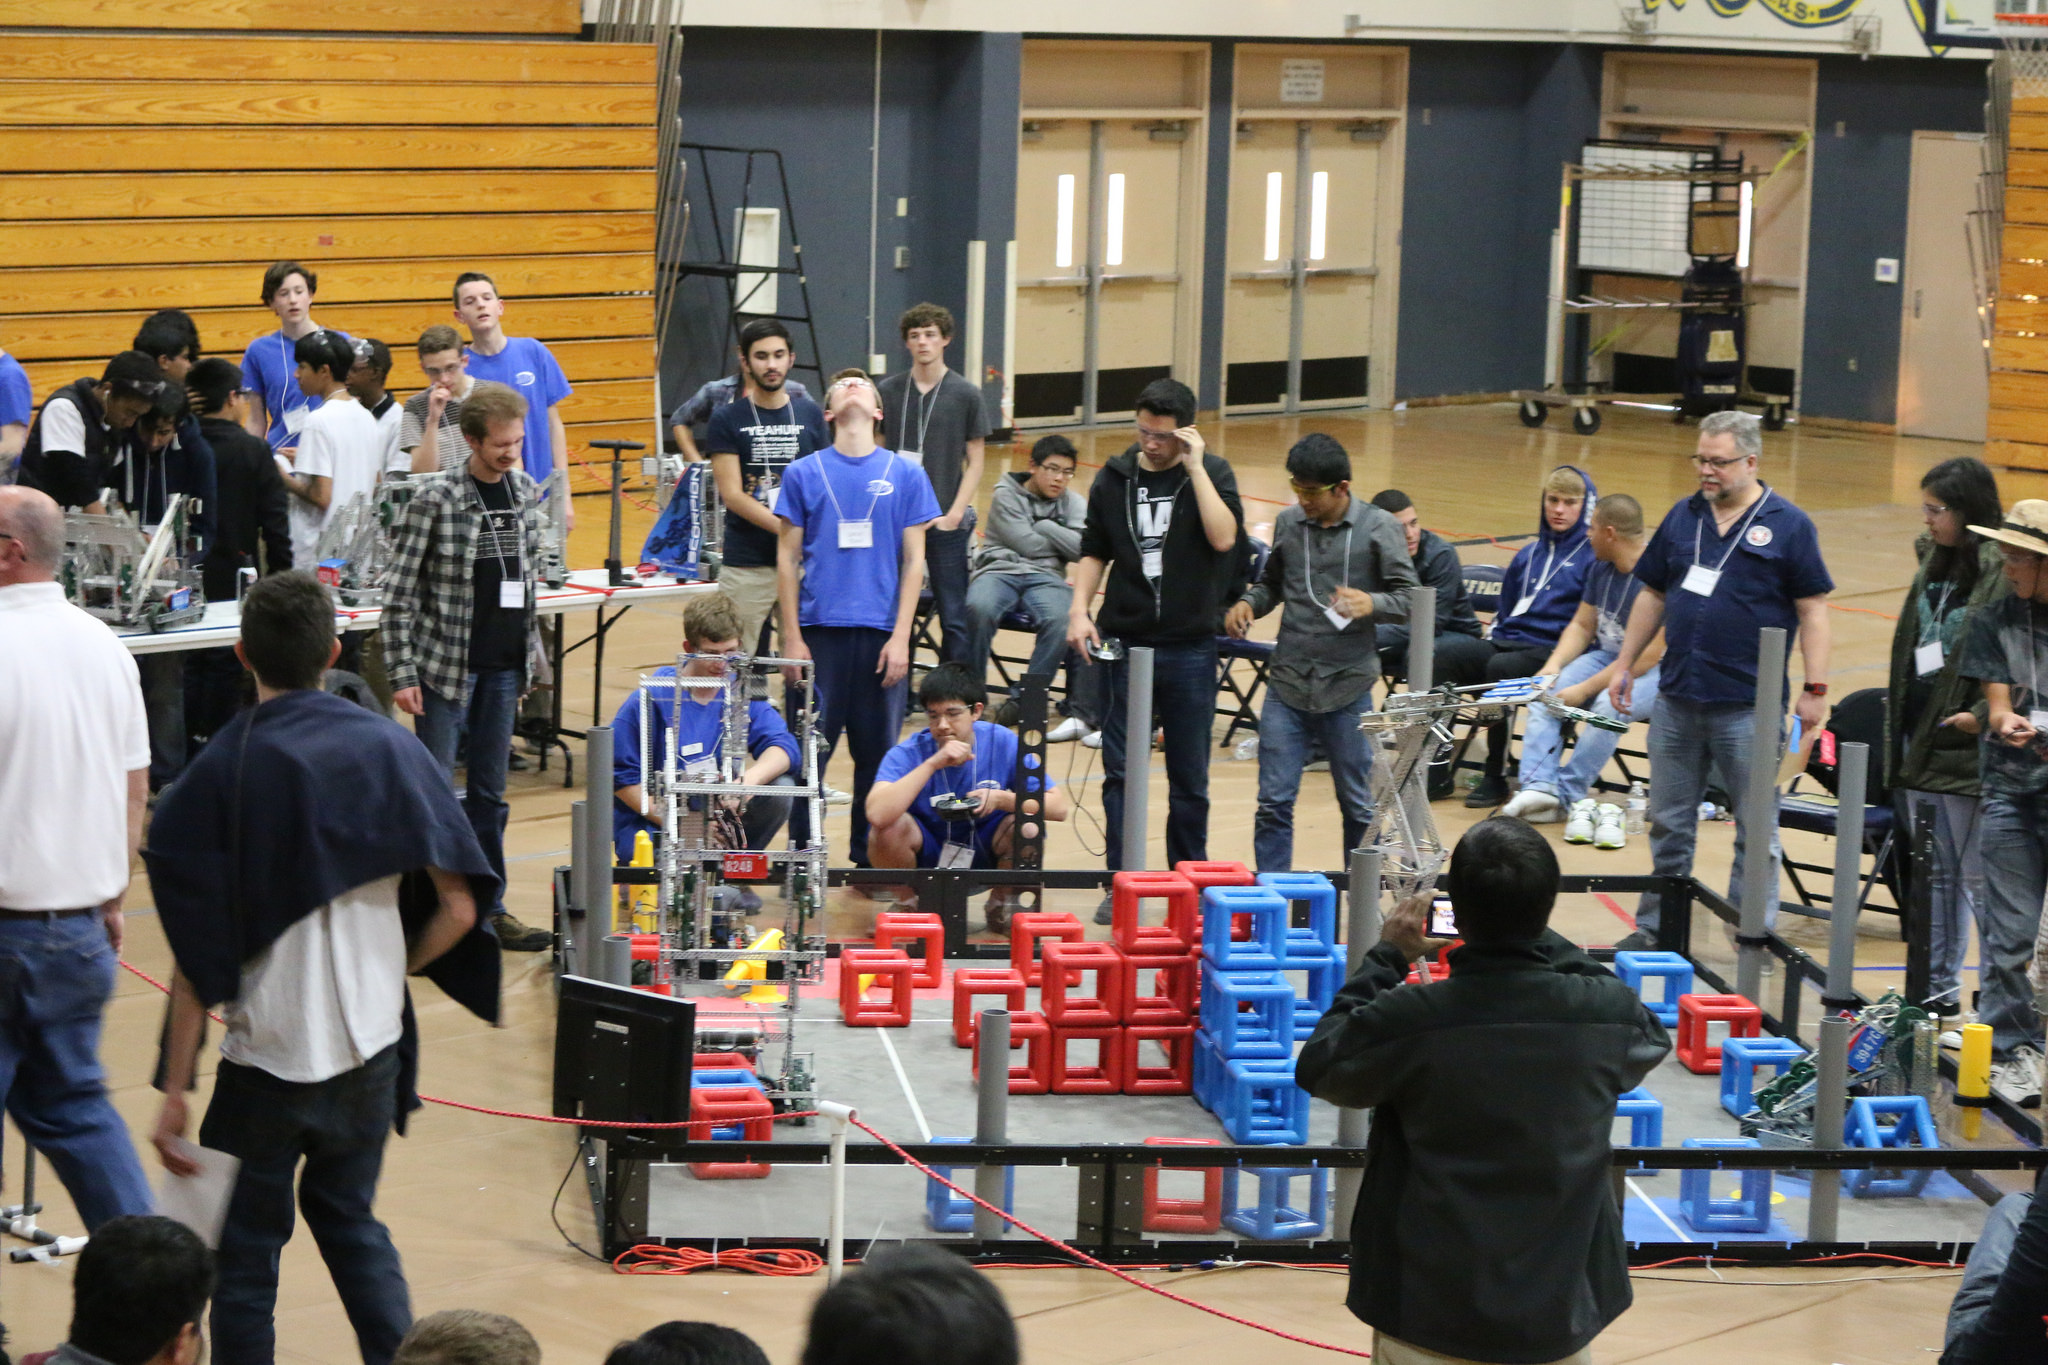 Team 254F competing in the quarterfinals